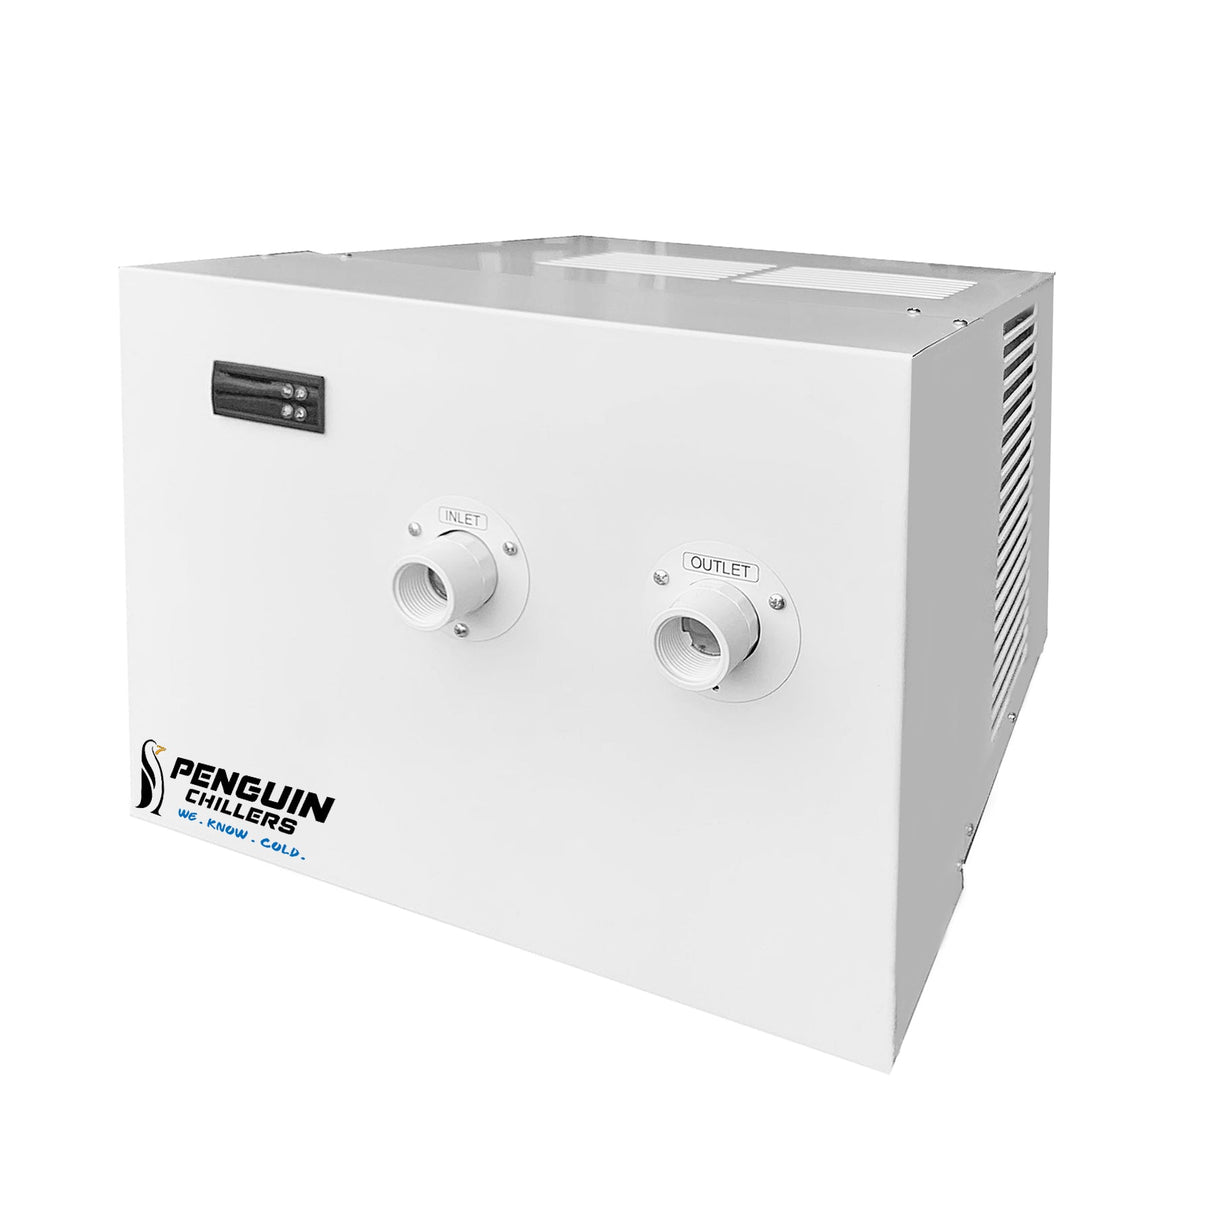 Penguin Chillers | Standard High Efficiency Water Chiller (1 HP)